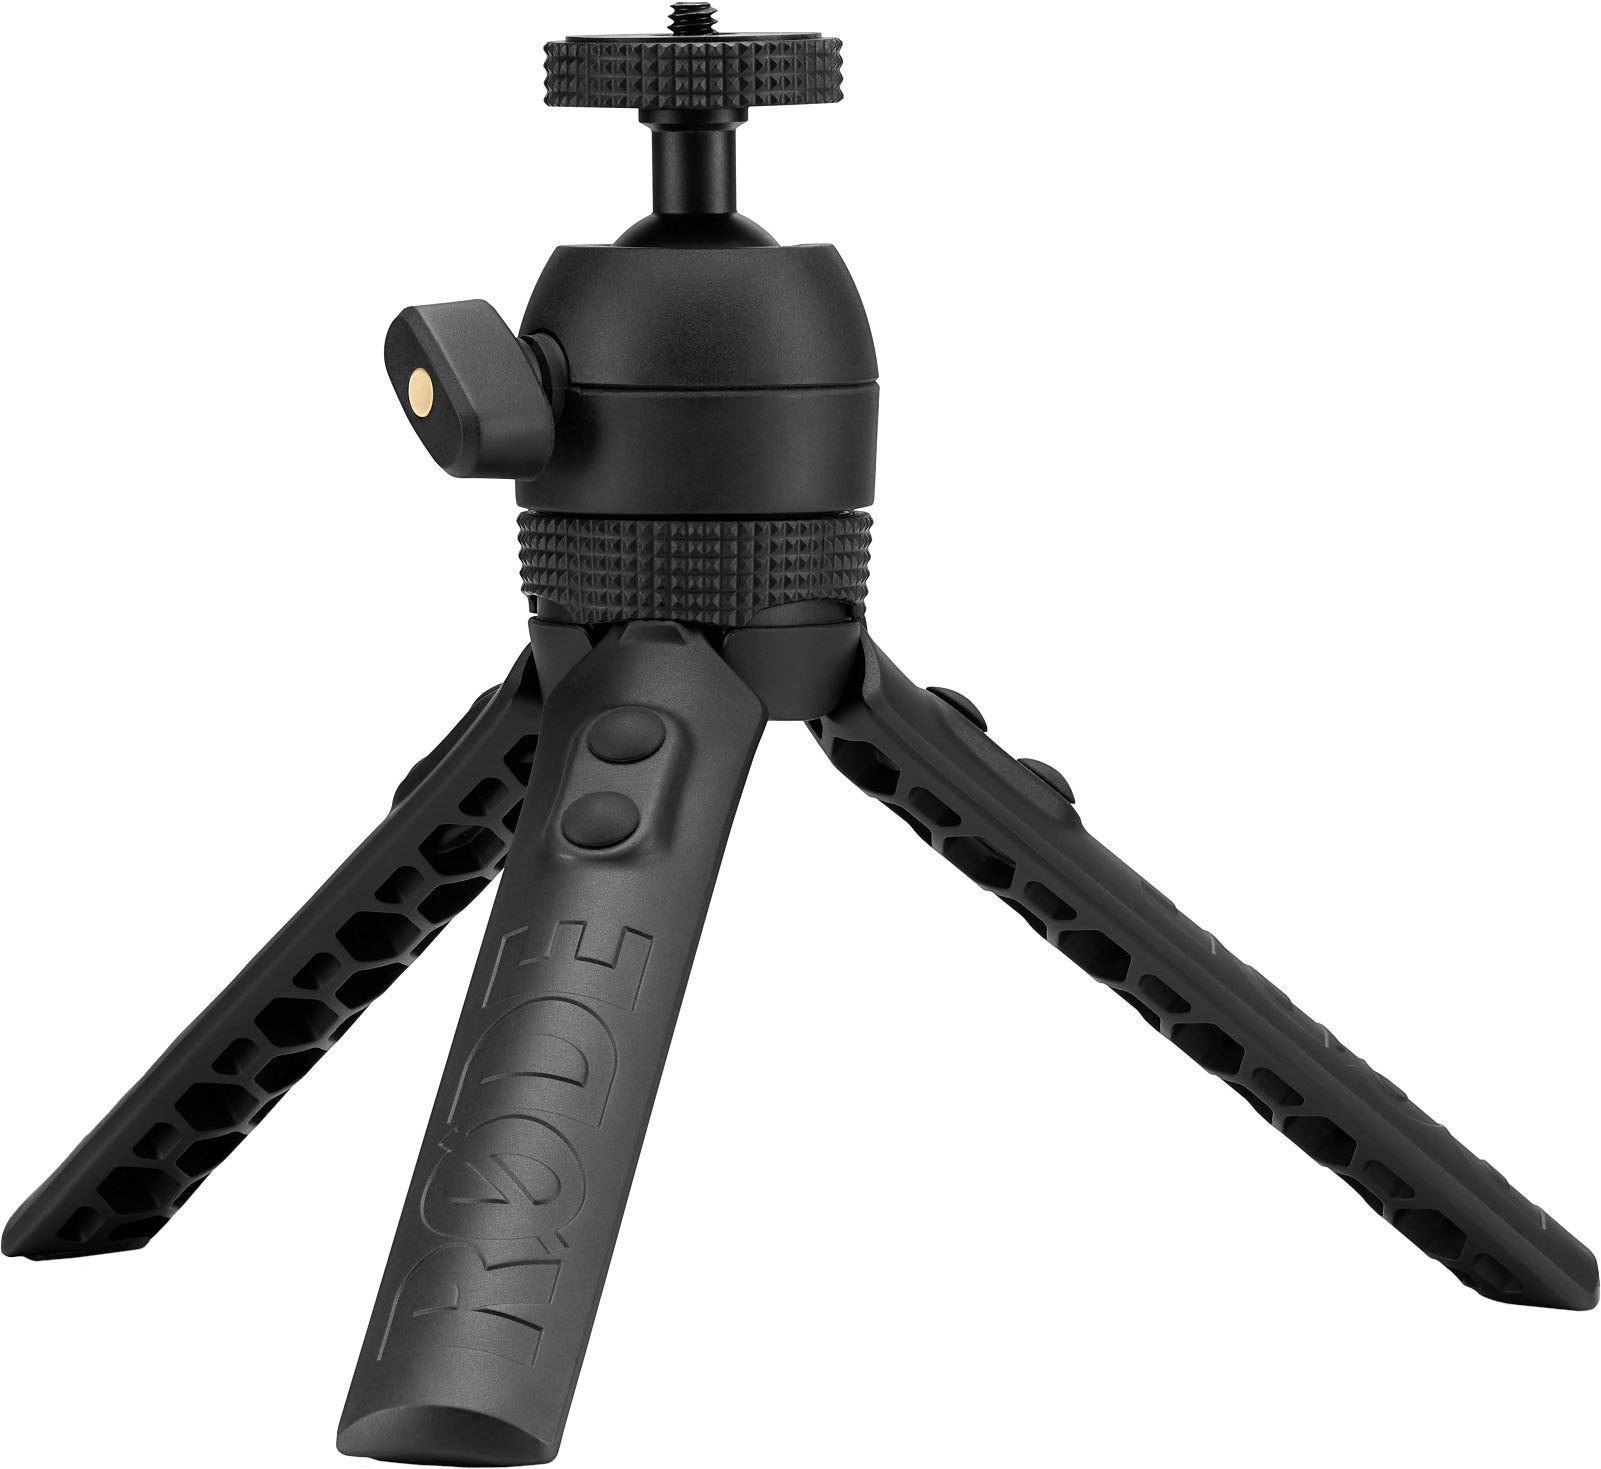 Angle View: RØDE - TRIPOD 2 Camera and Accessory 8" Mount - Black